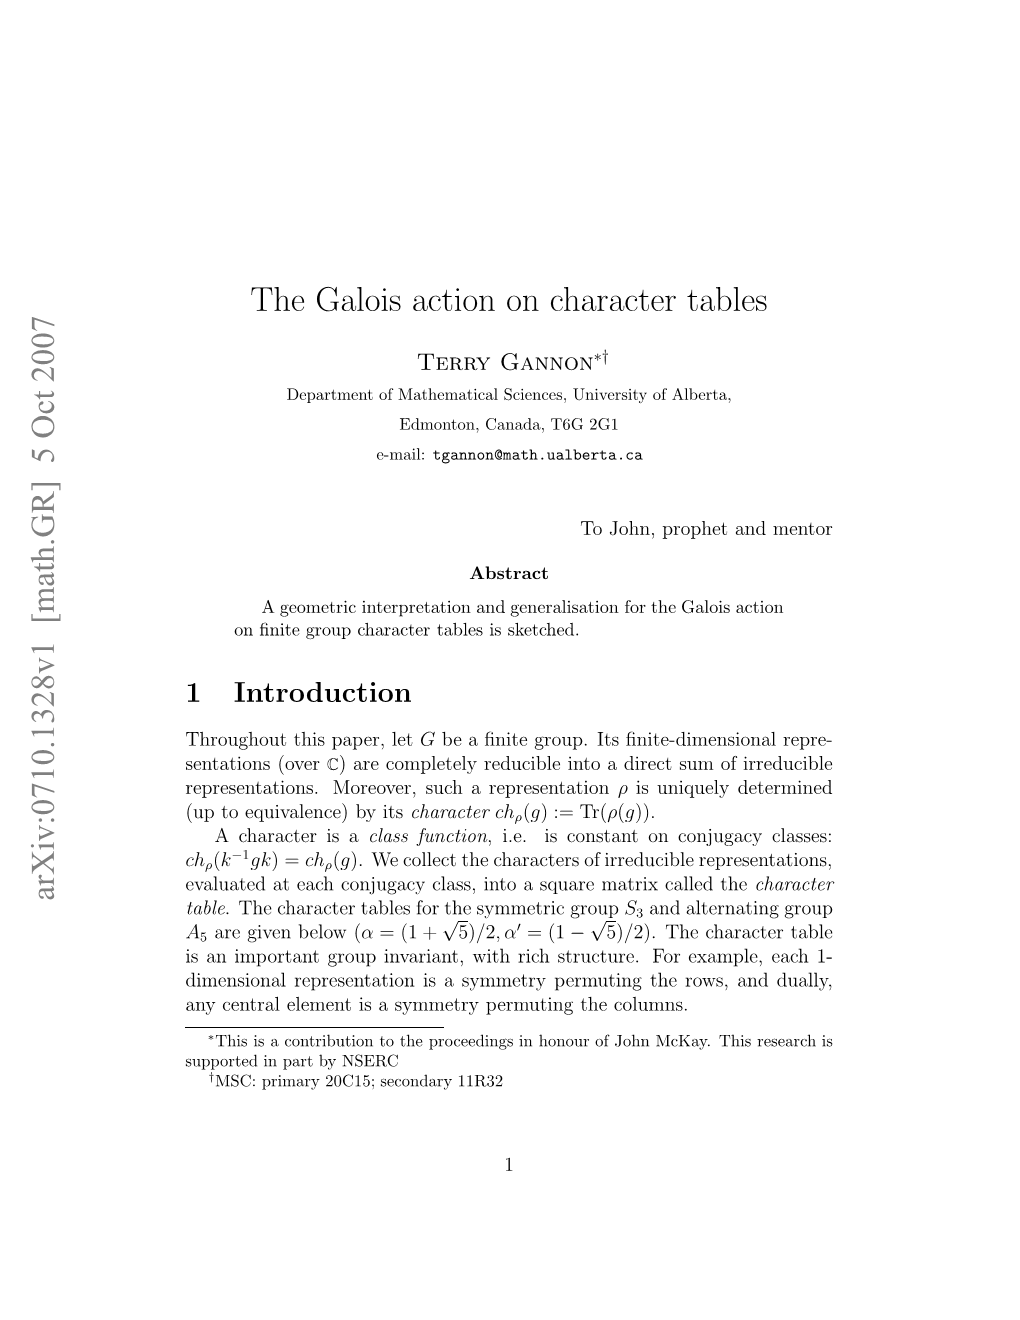 [Math.GR] 5 Oct 2007 the Galois Action on Character Tables